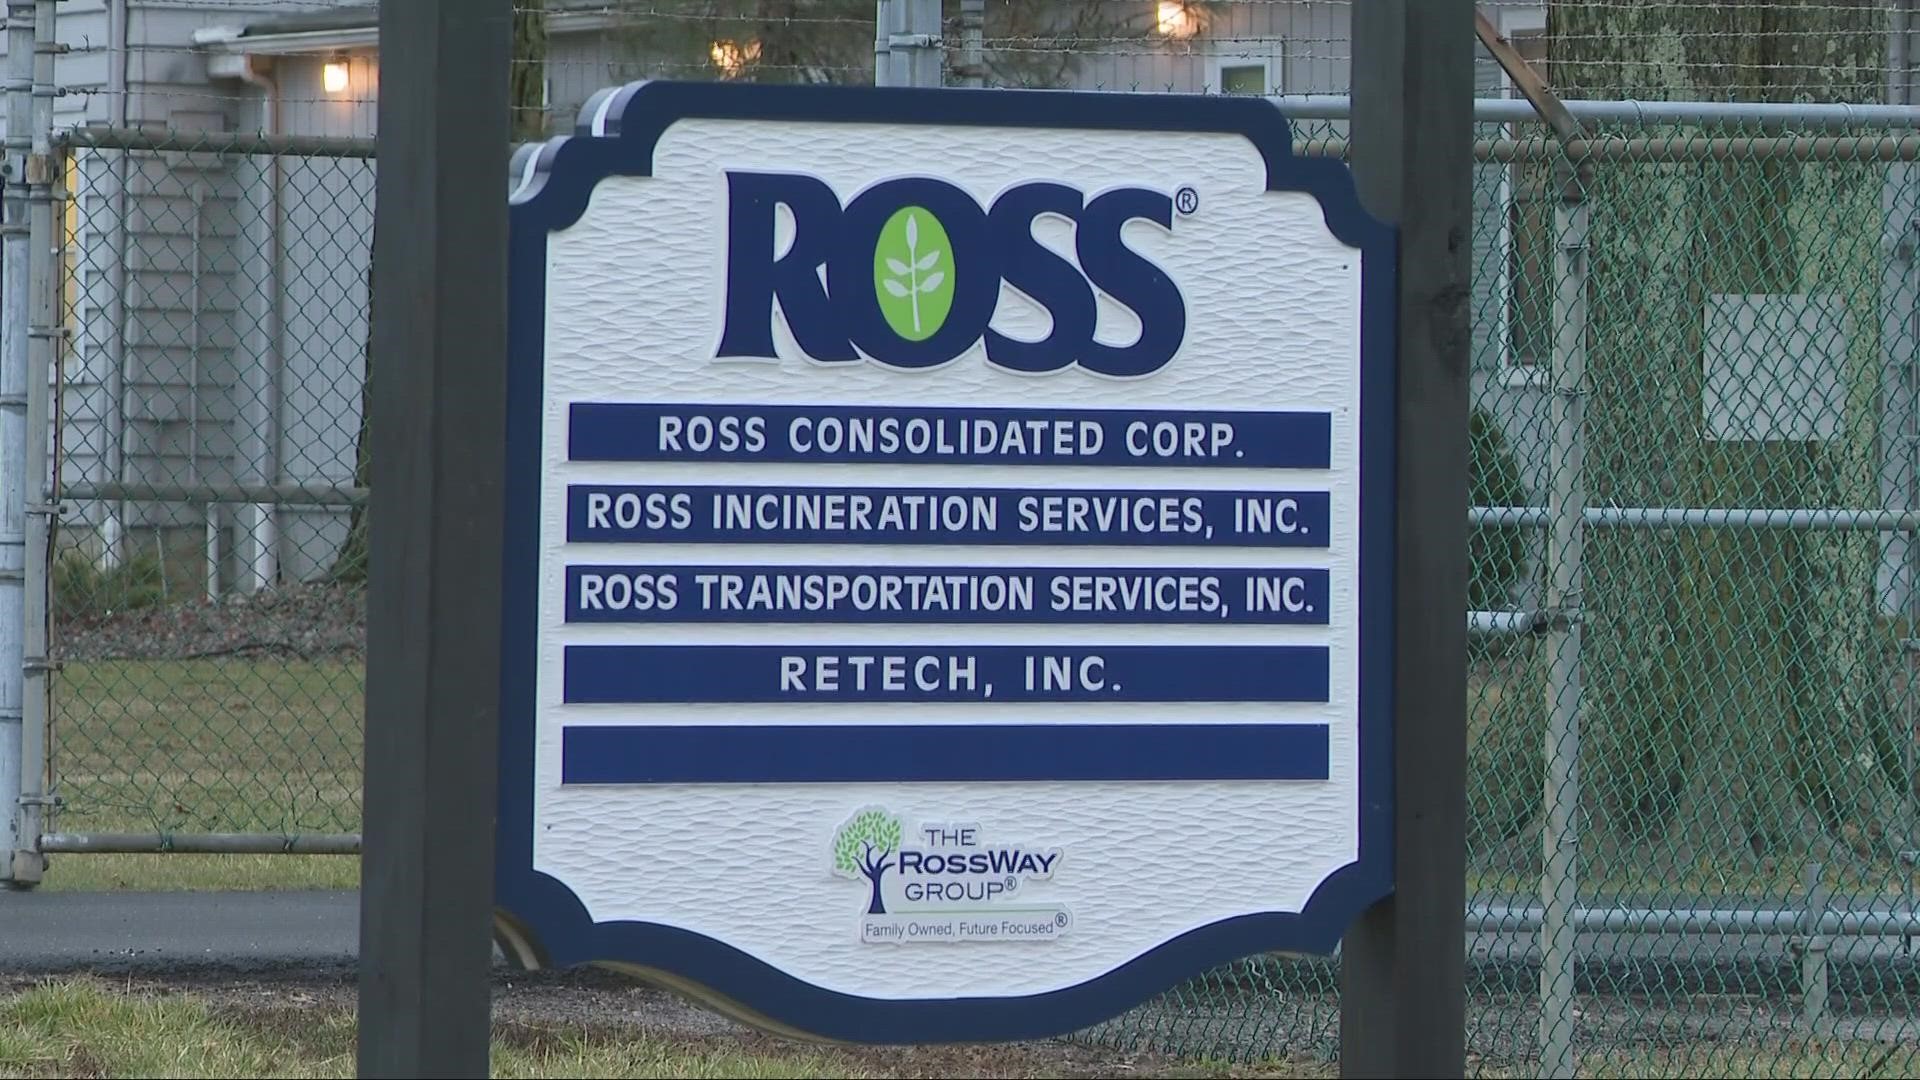 Ross Incineration in Grafton is one of the facilities that will handle the toxic waste from East Palestine. Nearby residents have health concerns.